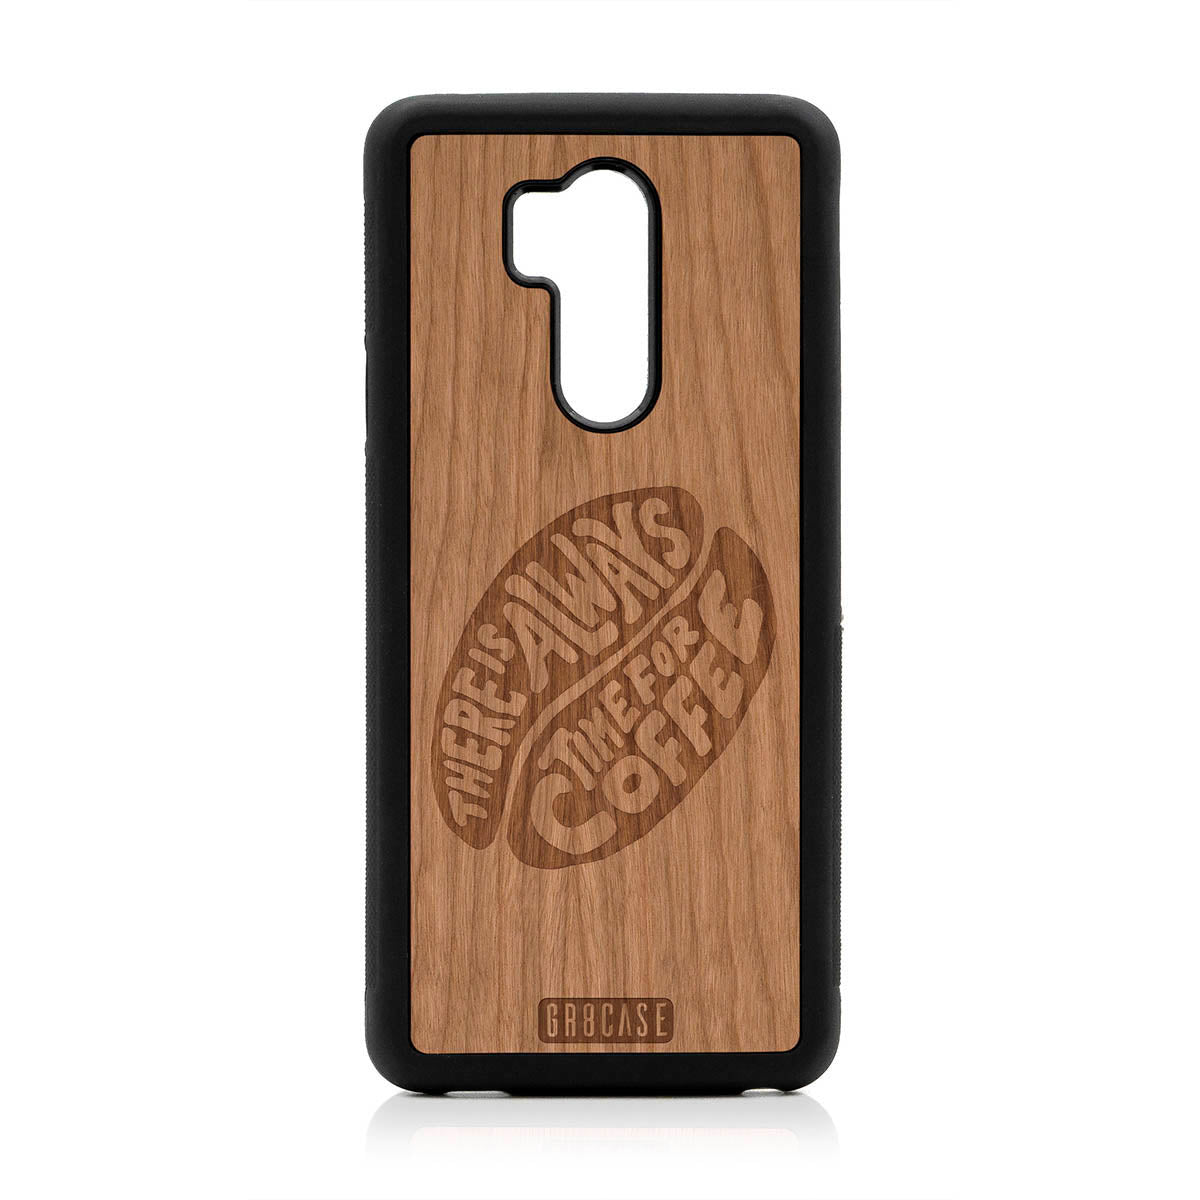 There Is Always Time For Coffee Design Wood Case For LG G7 ThinQ